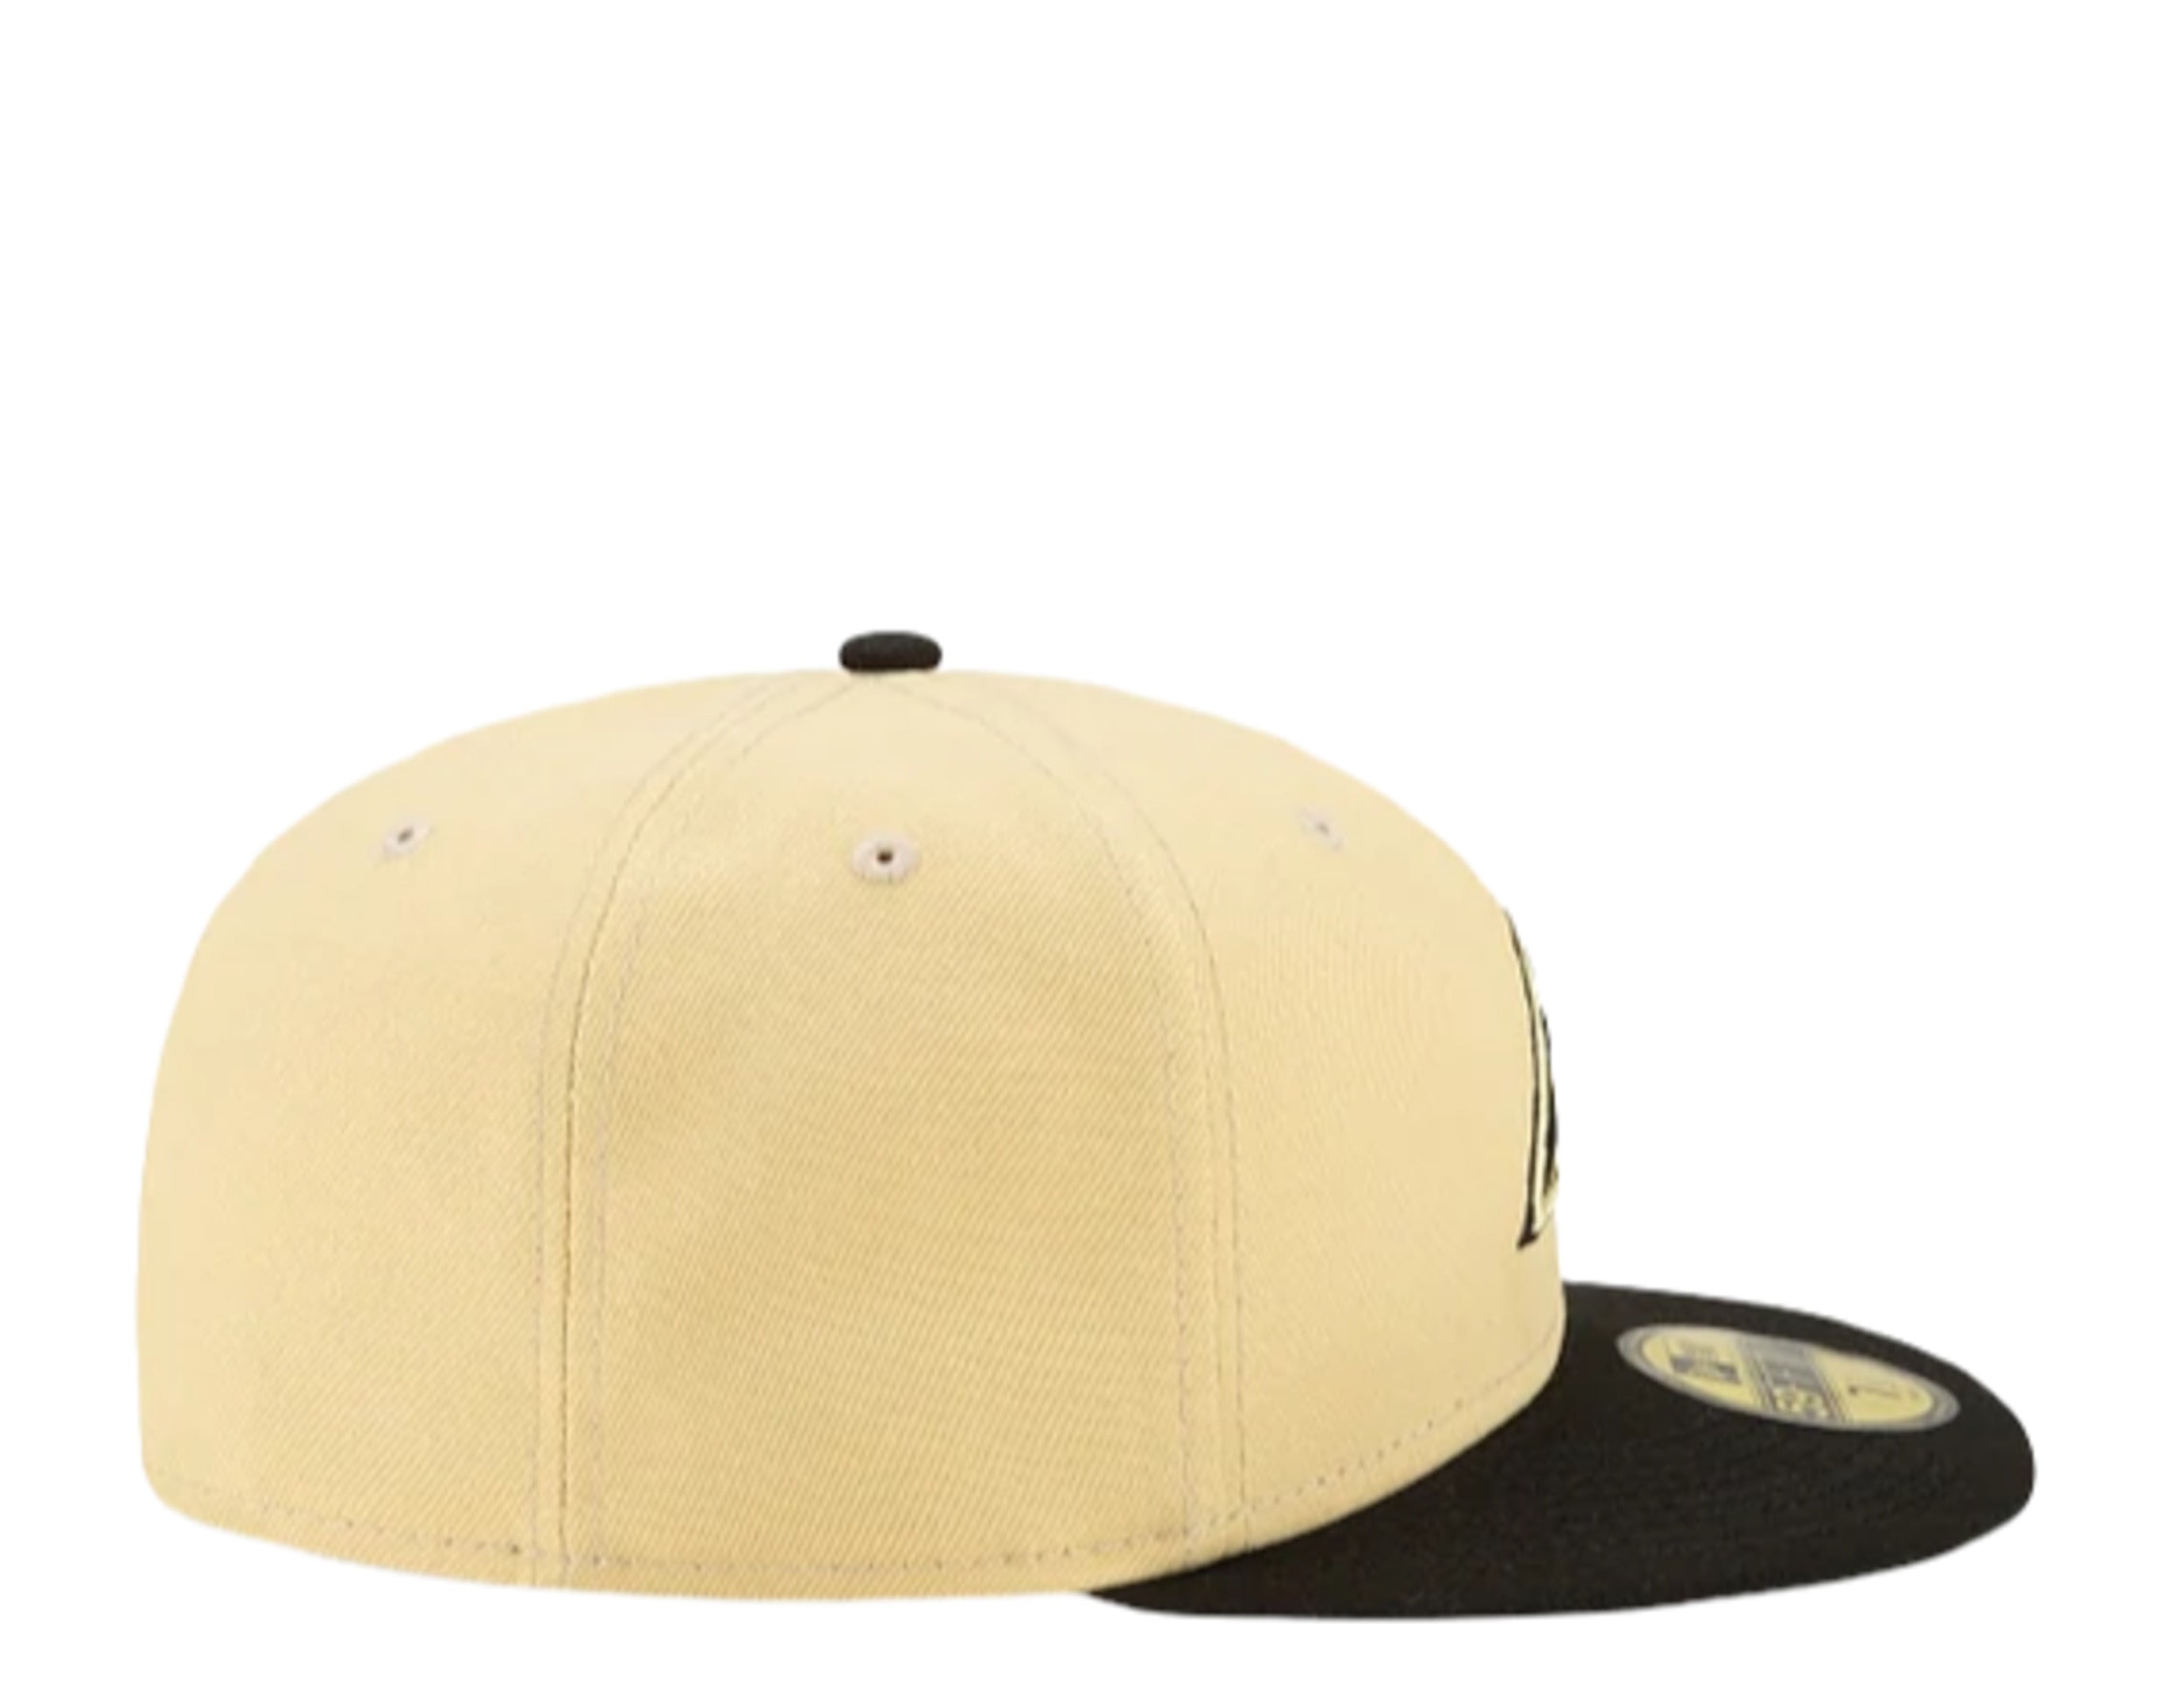 MLB City Connect Fitted Hats